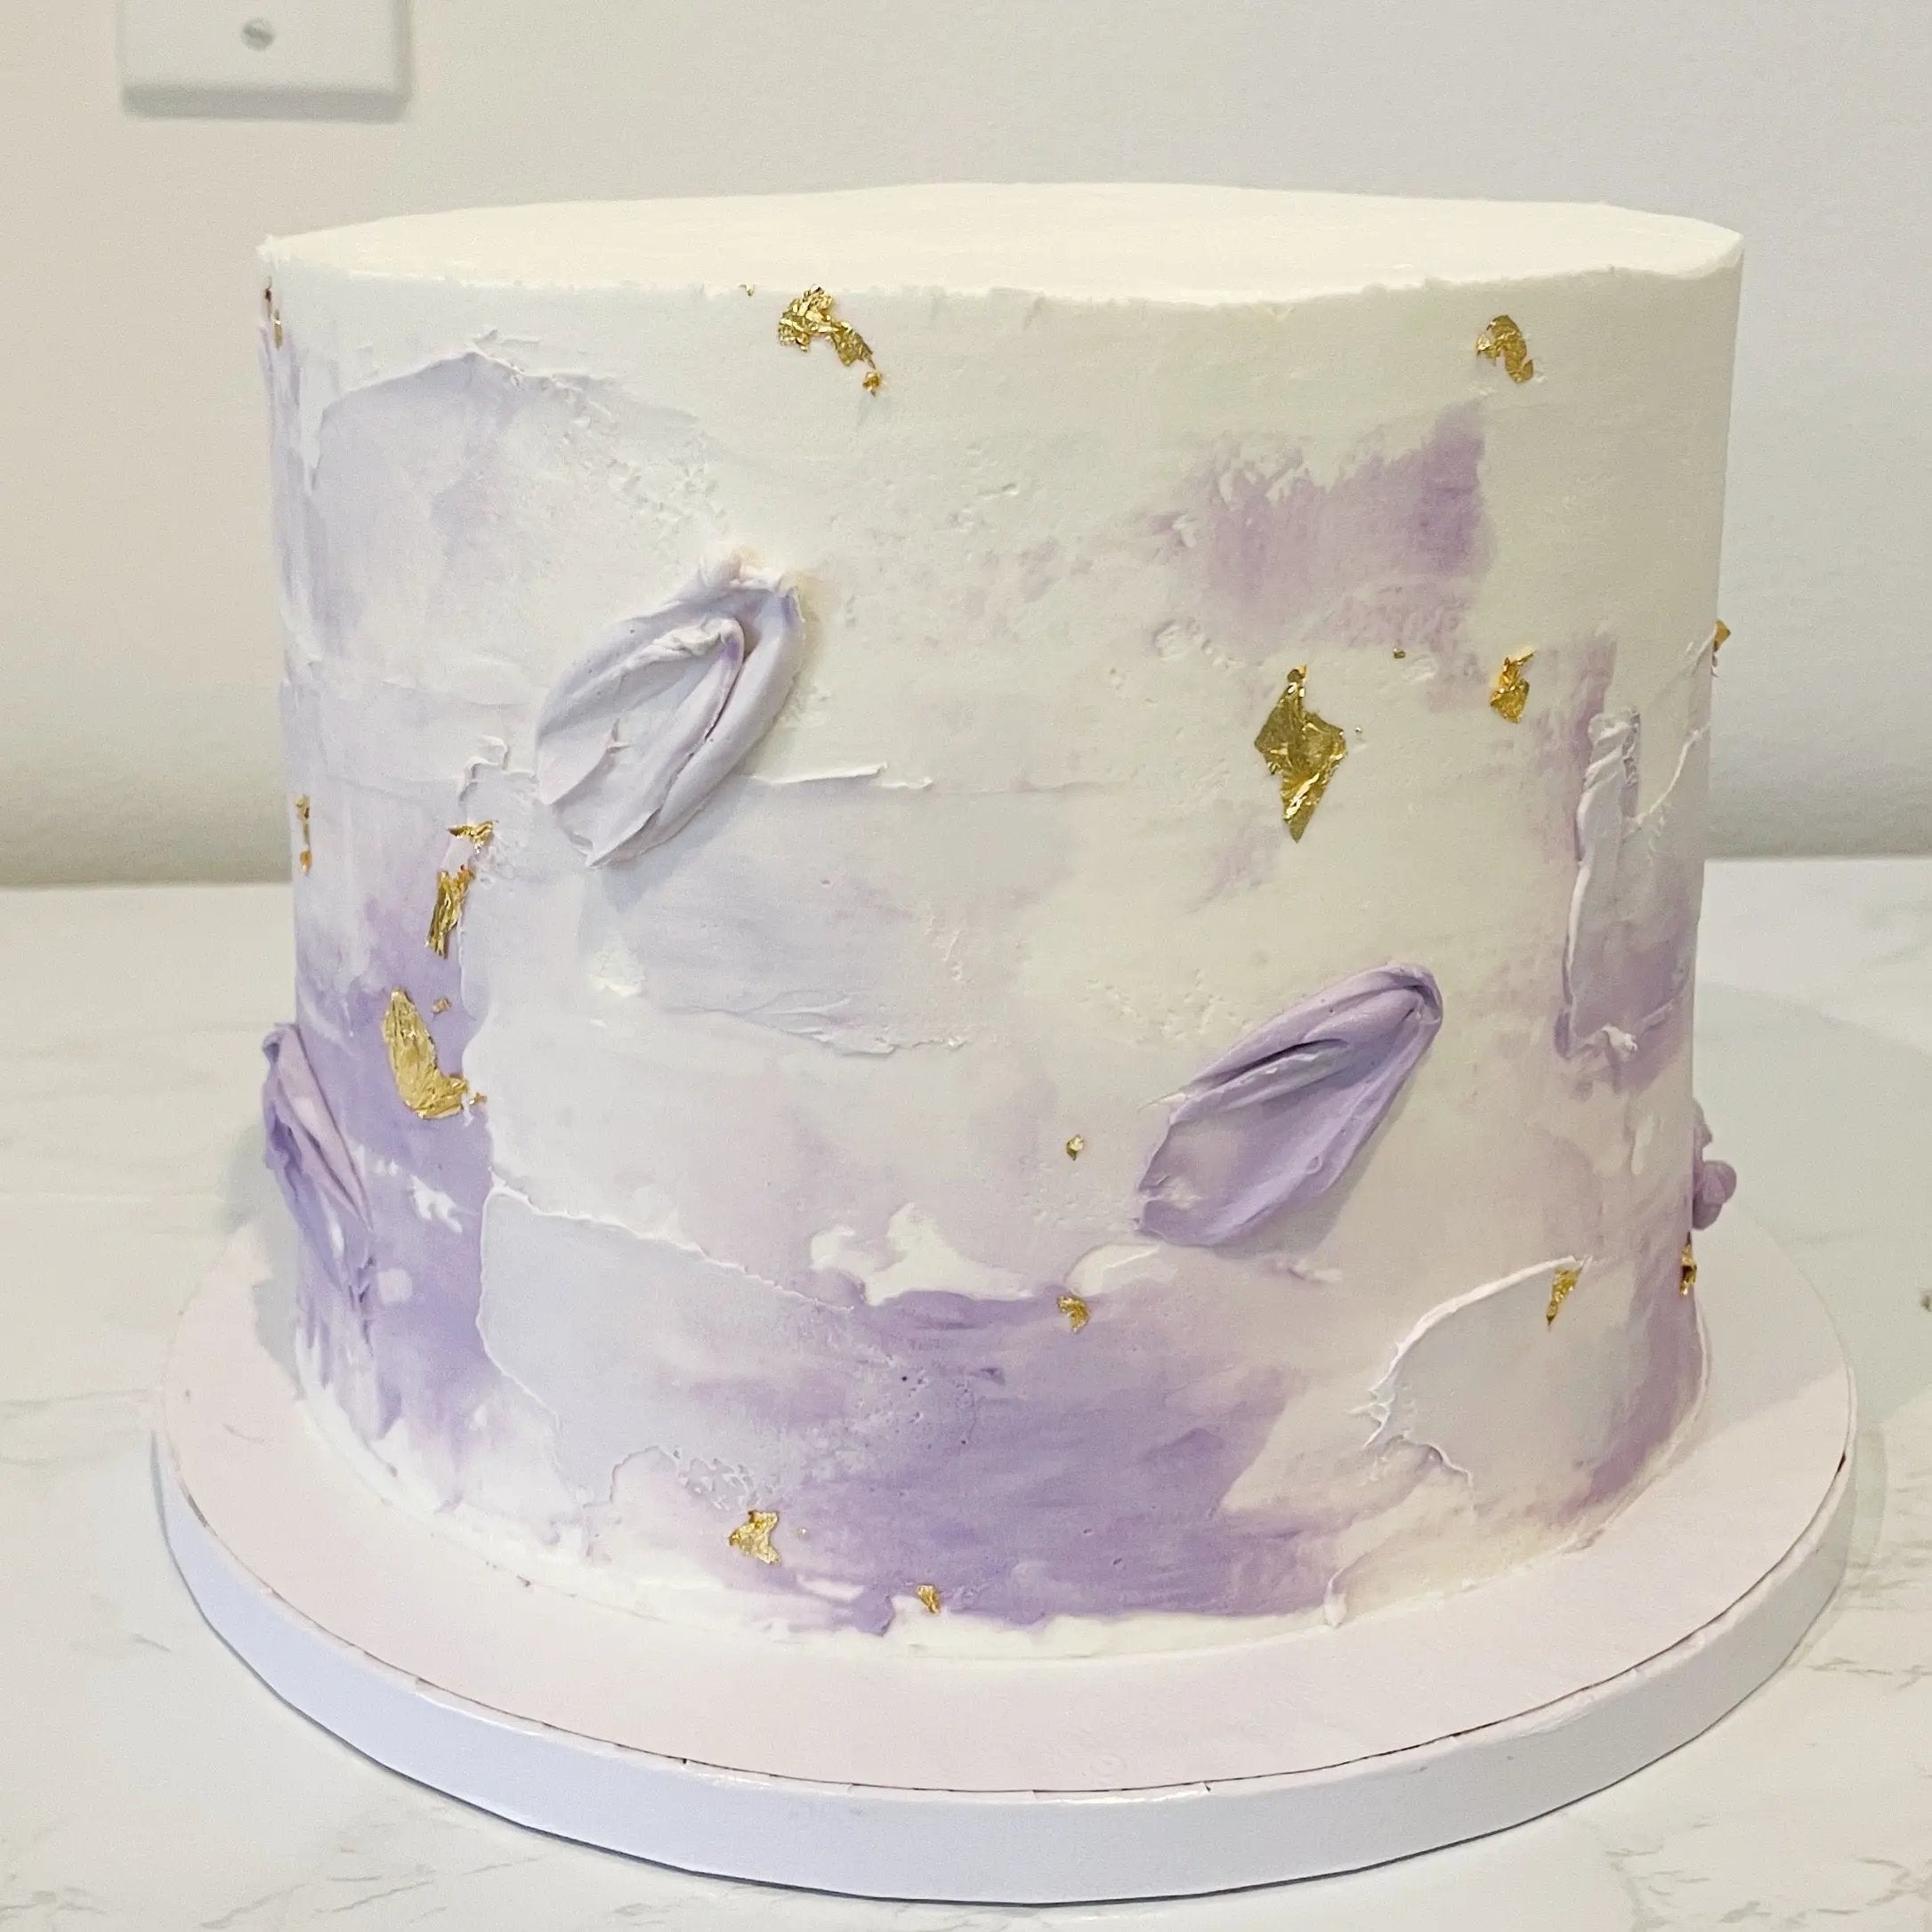 Abstract Petals Cutting Cake